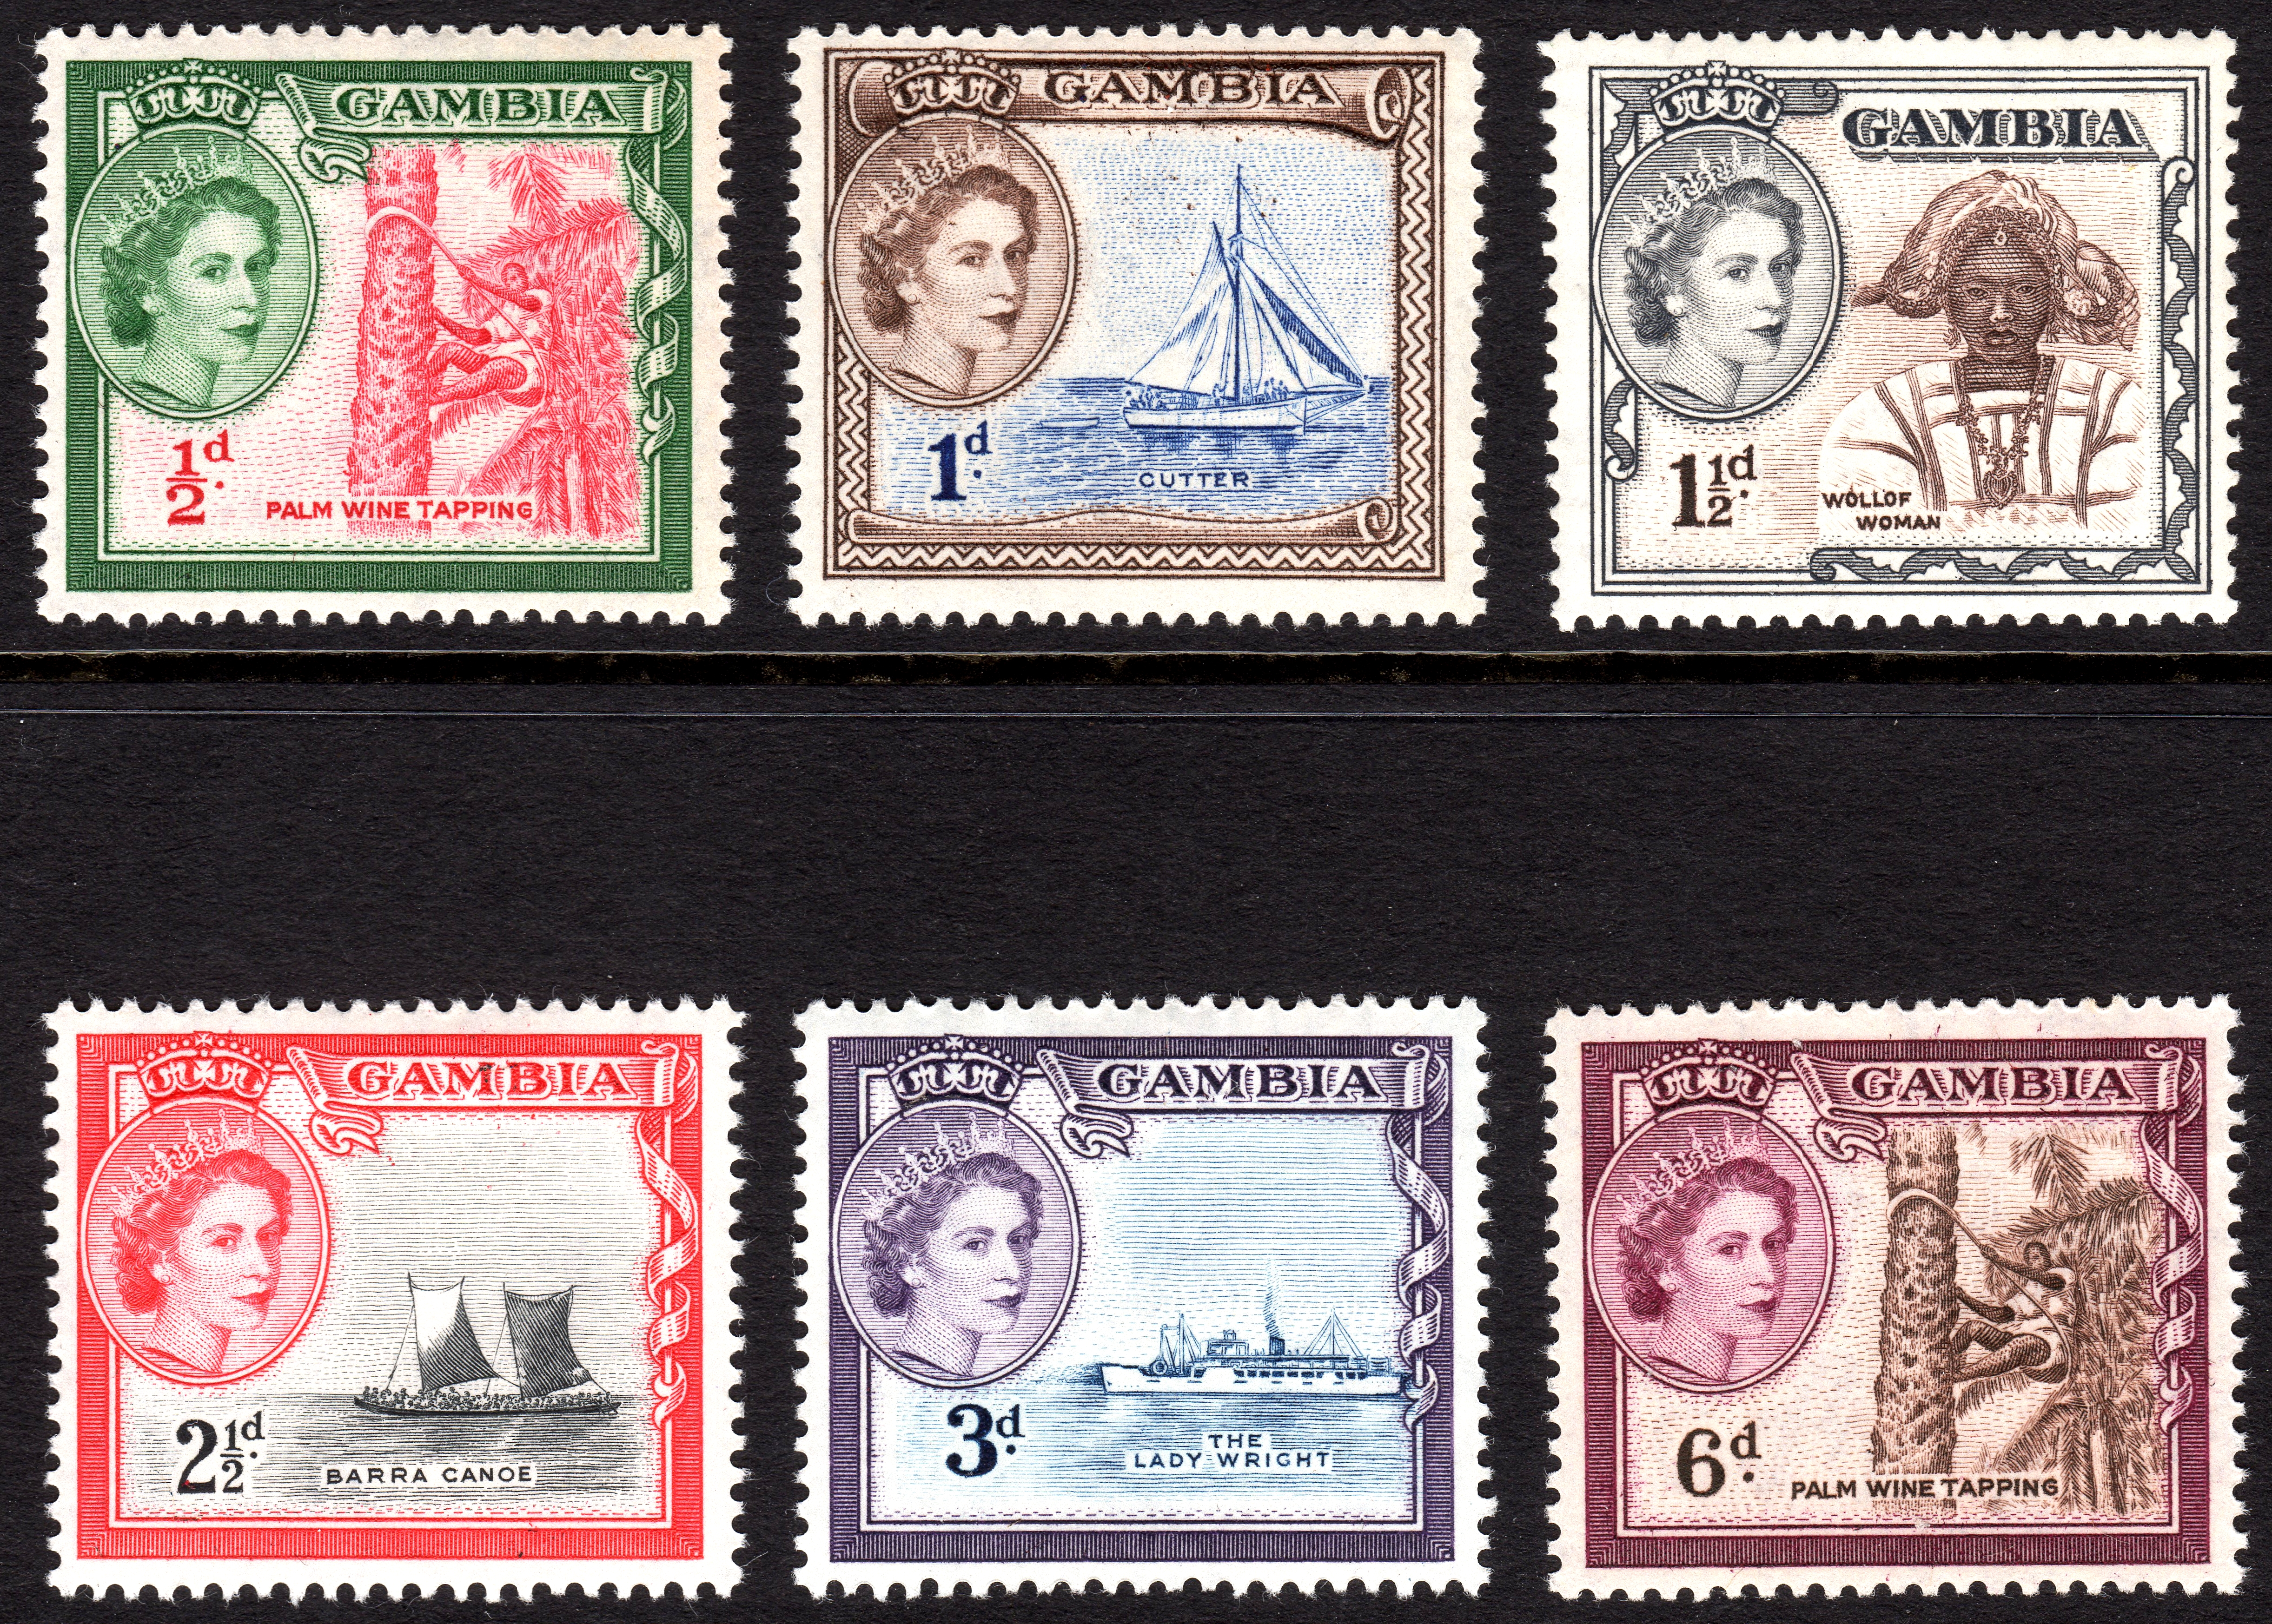 Gambia 1953 stamps